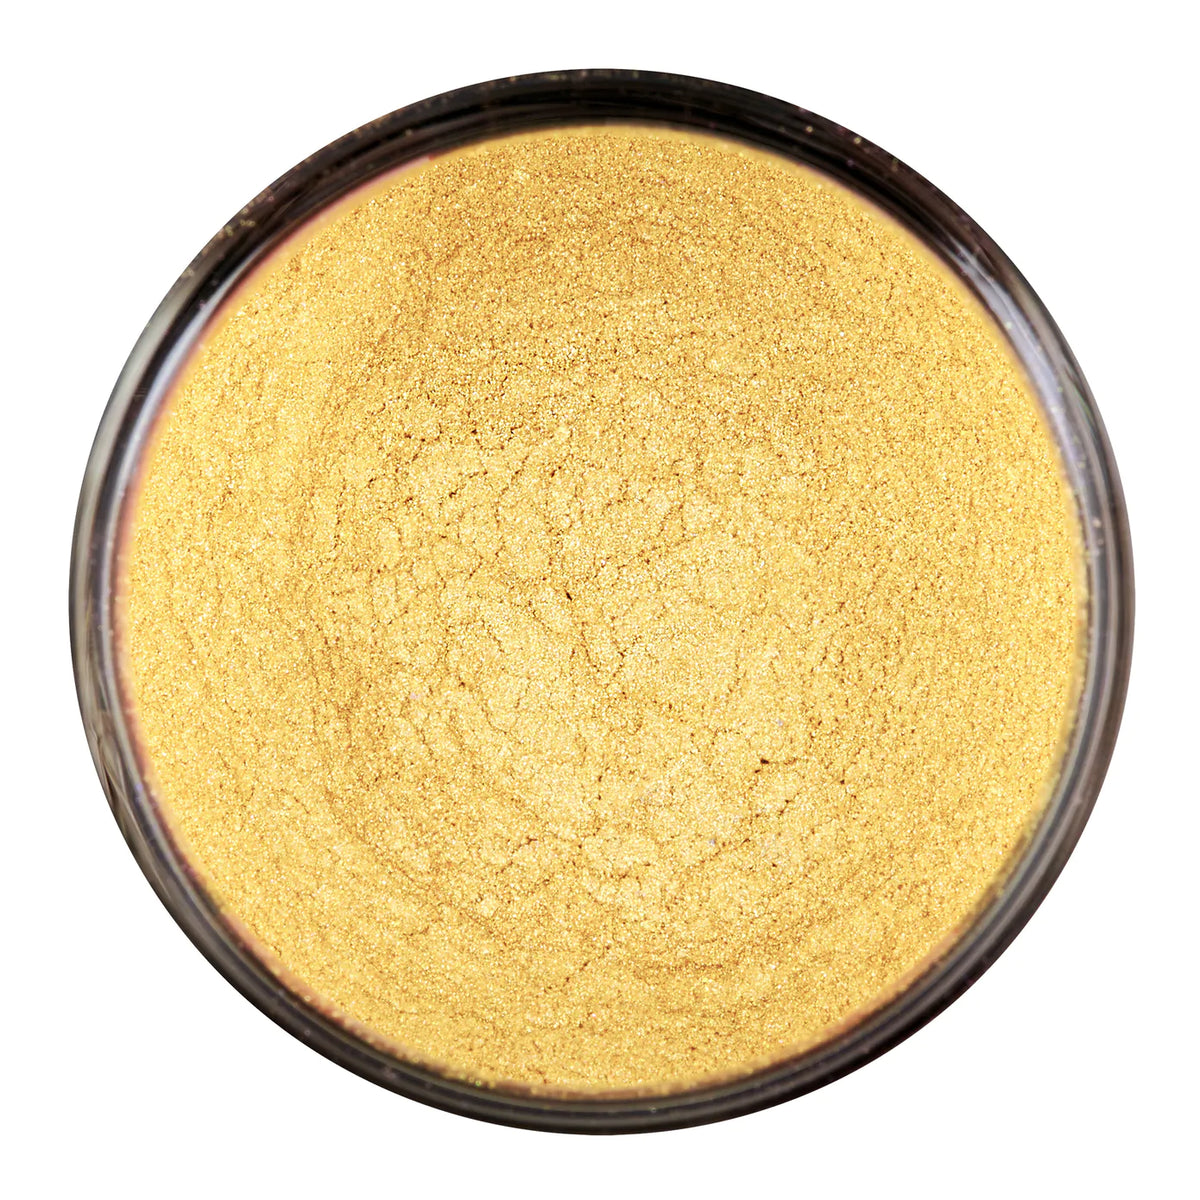 Bronze Gold Edible Luster Dust and Cake Paint Edible Powder KOSHER  Certified Paint, Powder, Dust Cakes, Cupcakes, Vegan Paint & Dust 